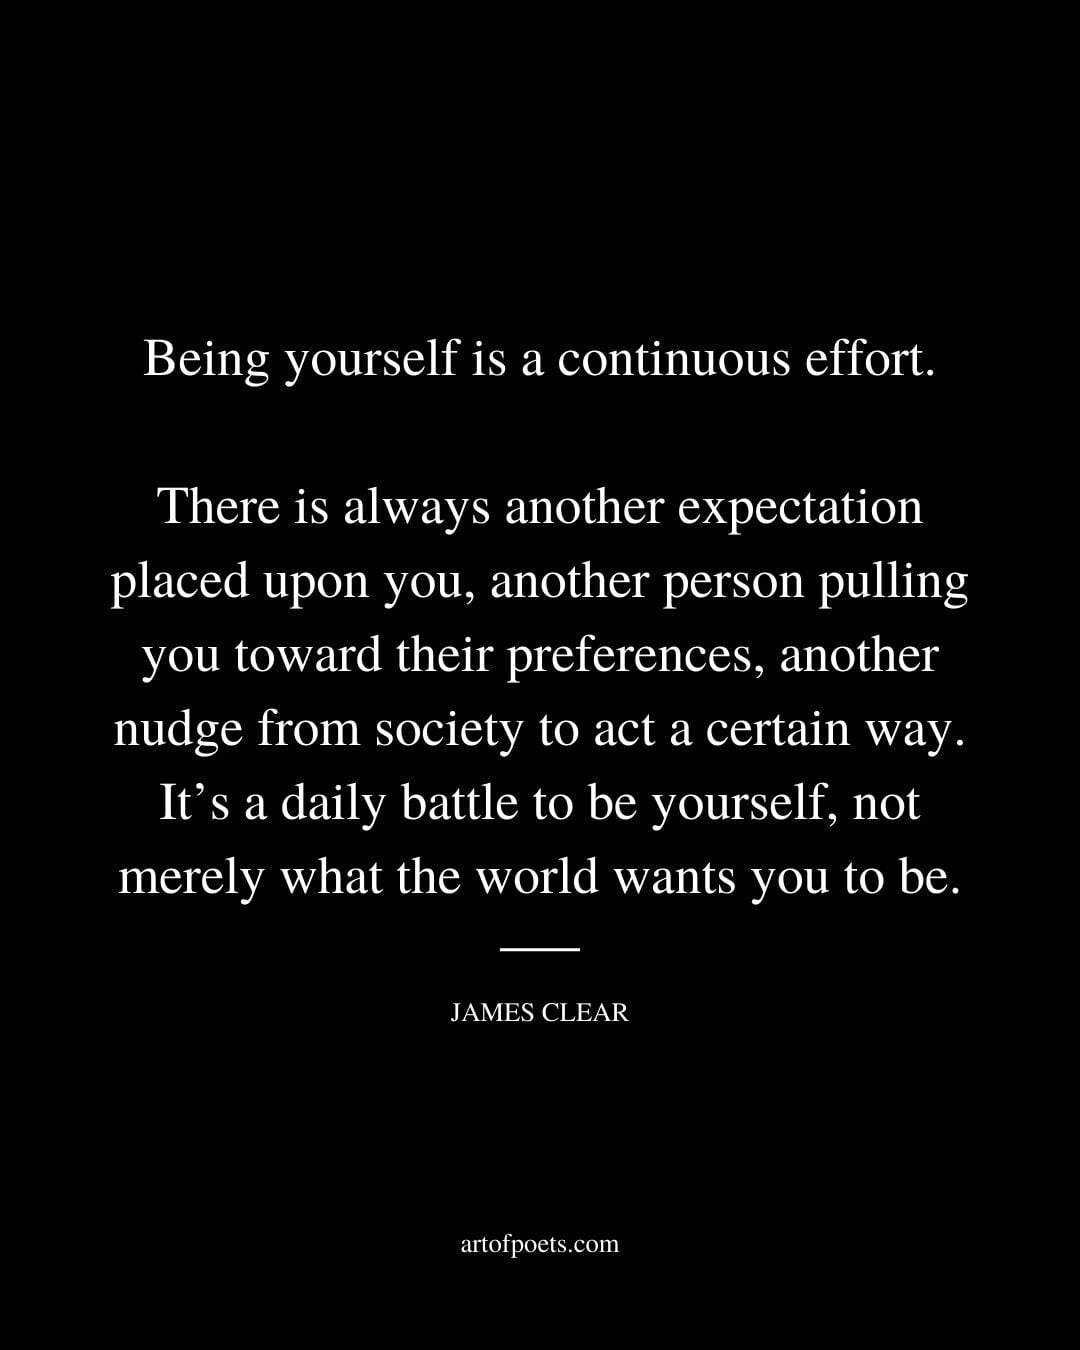 Being yourself is a continuous effort. There is always another expectation placed upon you another person pulling you toward their preferences another nudge from society to act a certain way